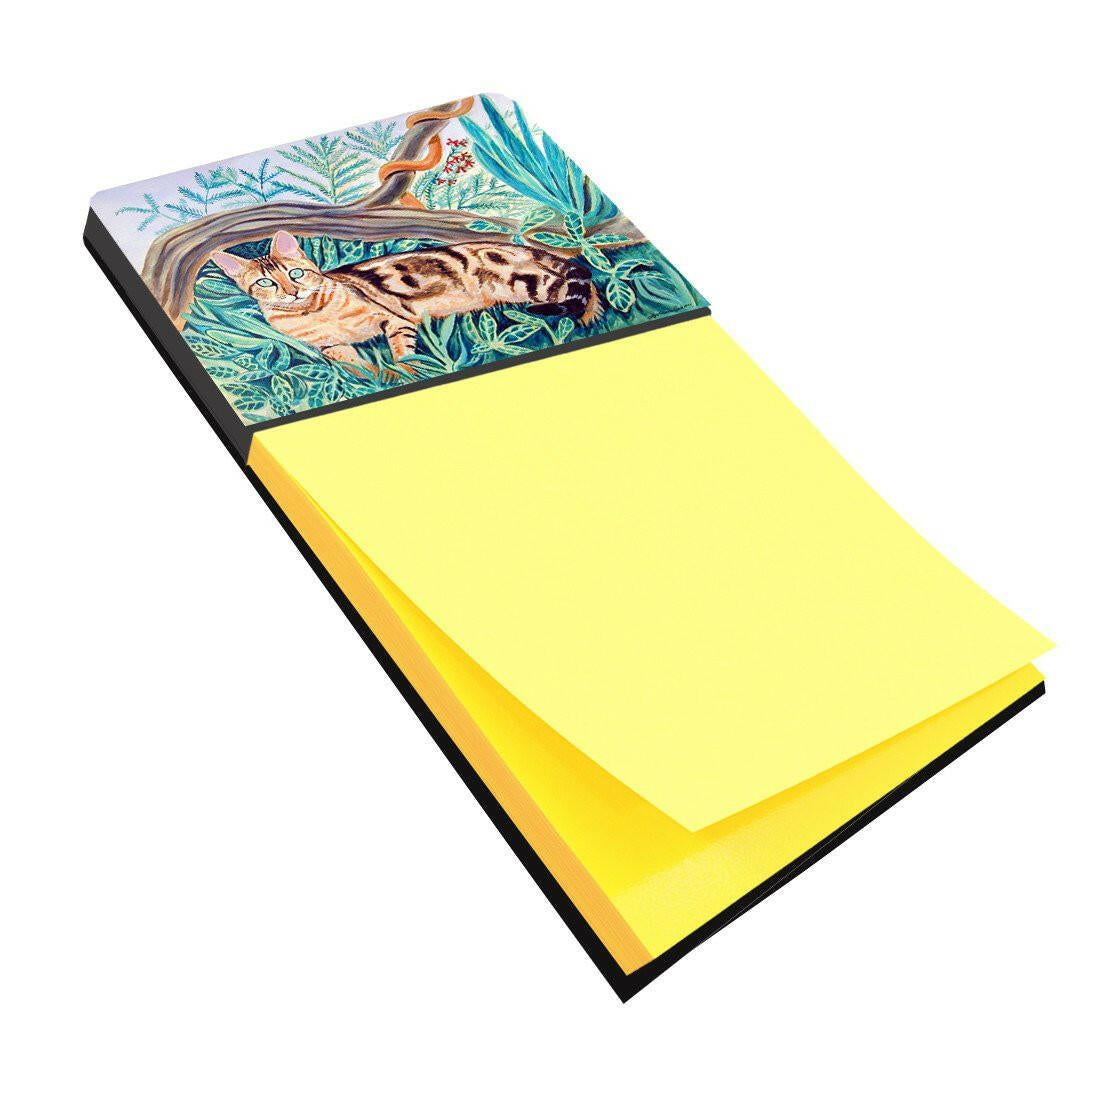 Cat - Maine Coon Refiillable Sticky Note Holder or Postit Note Dispenser 7139SN by Caroline's Treasures